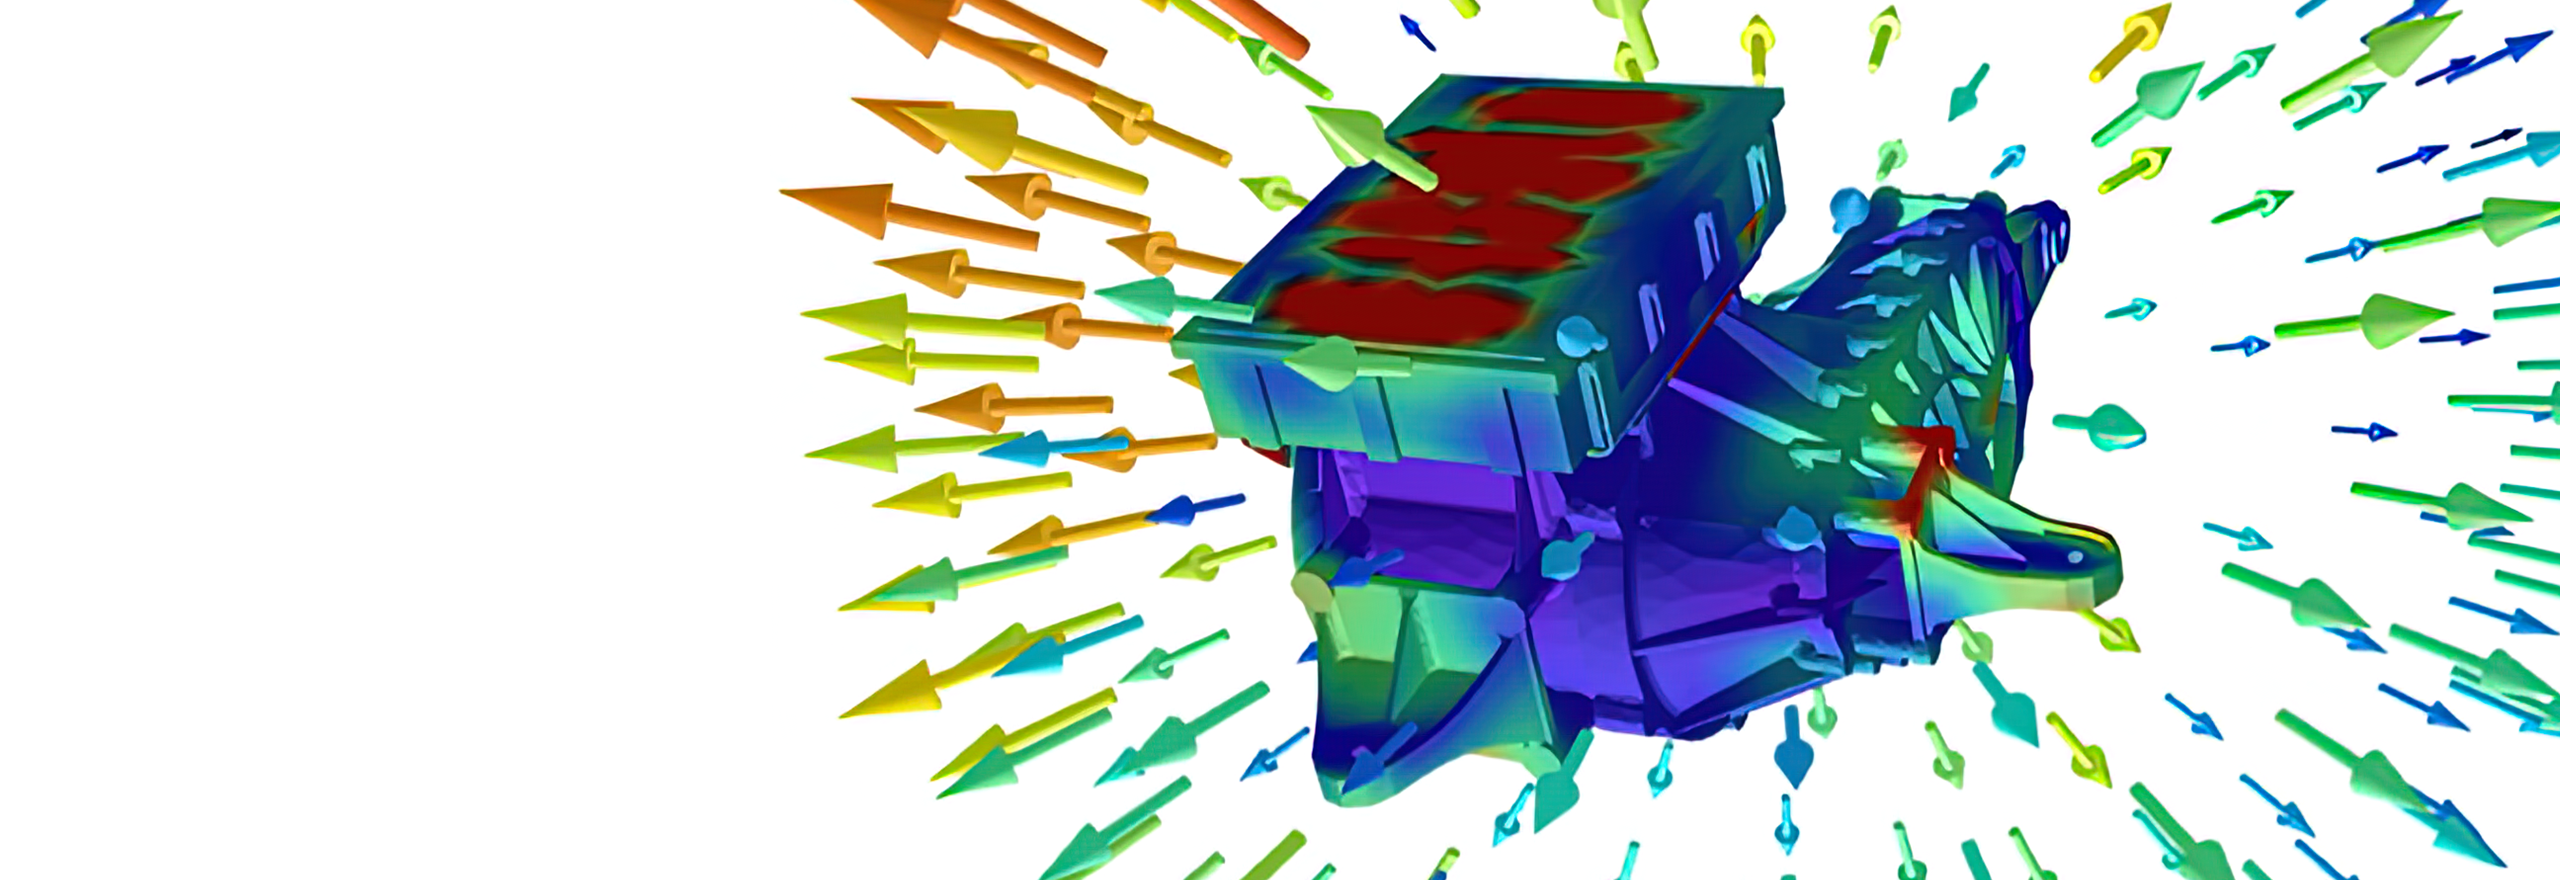 End-to-end ePowertrain NVH and acoustic simulation